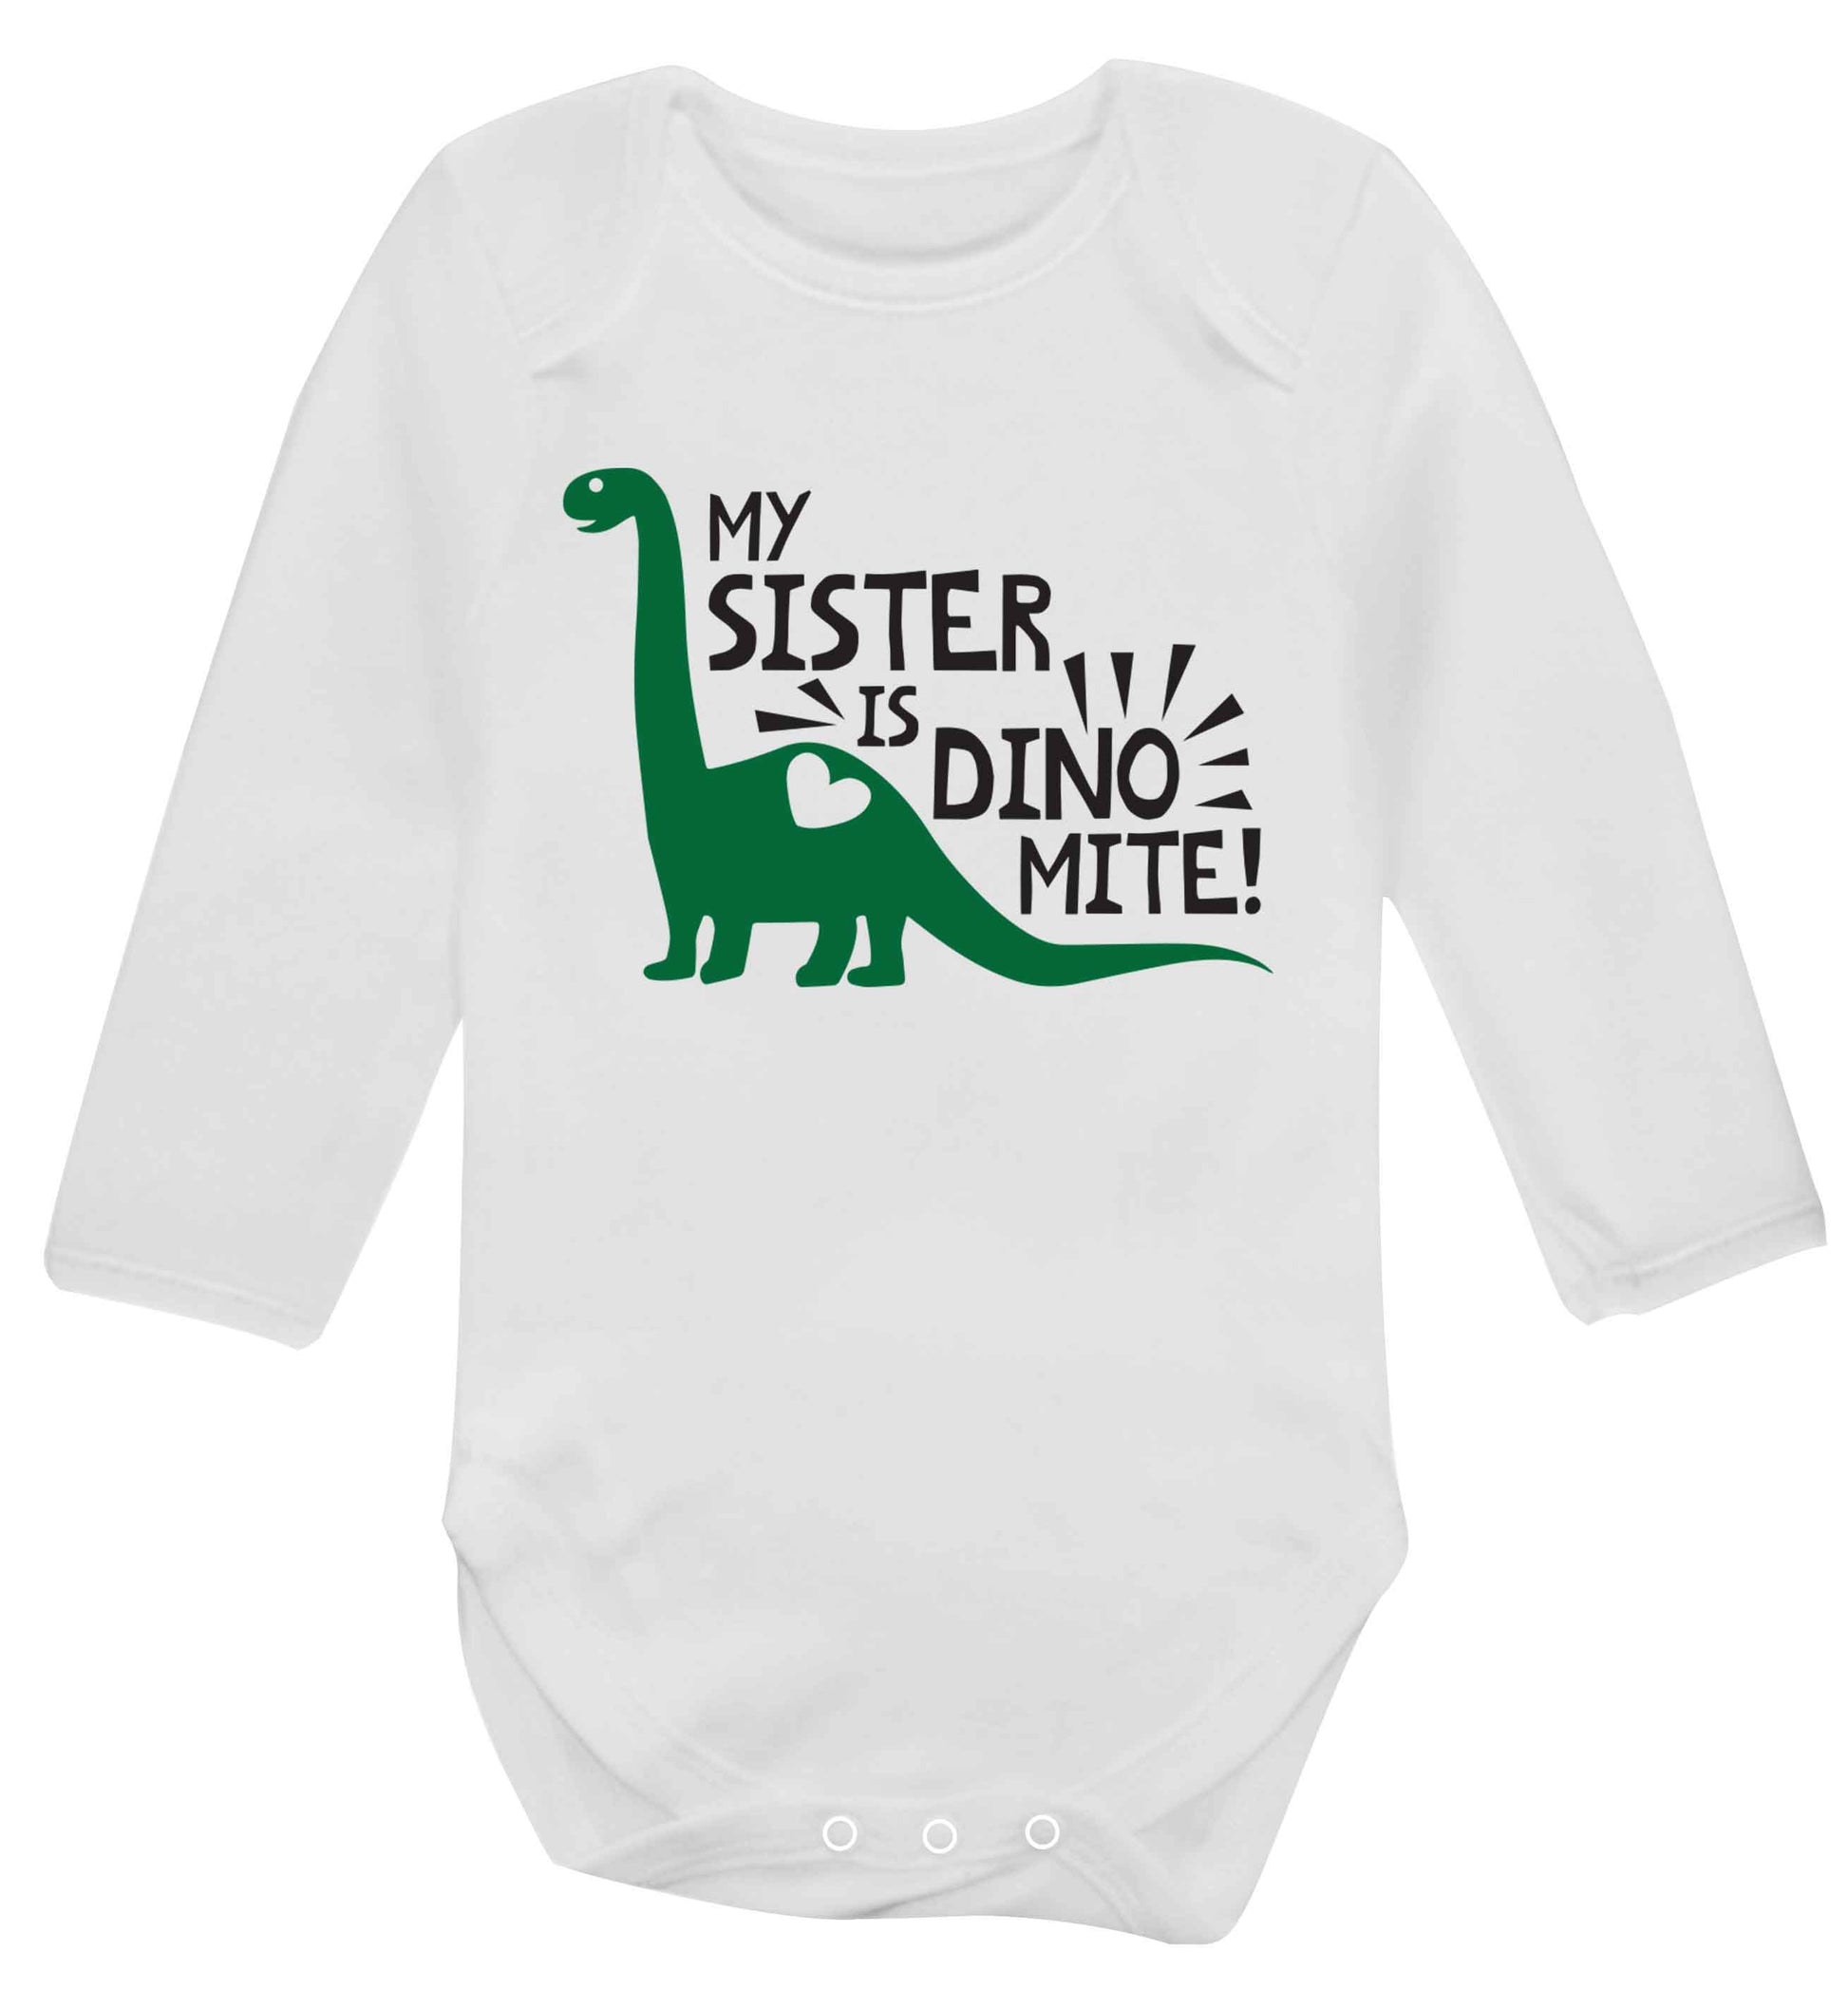 My sister is dinomite! Baby Vest long sleeved white 6-12 months